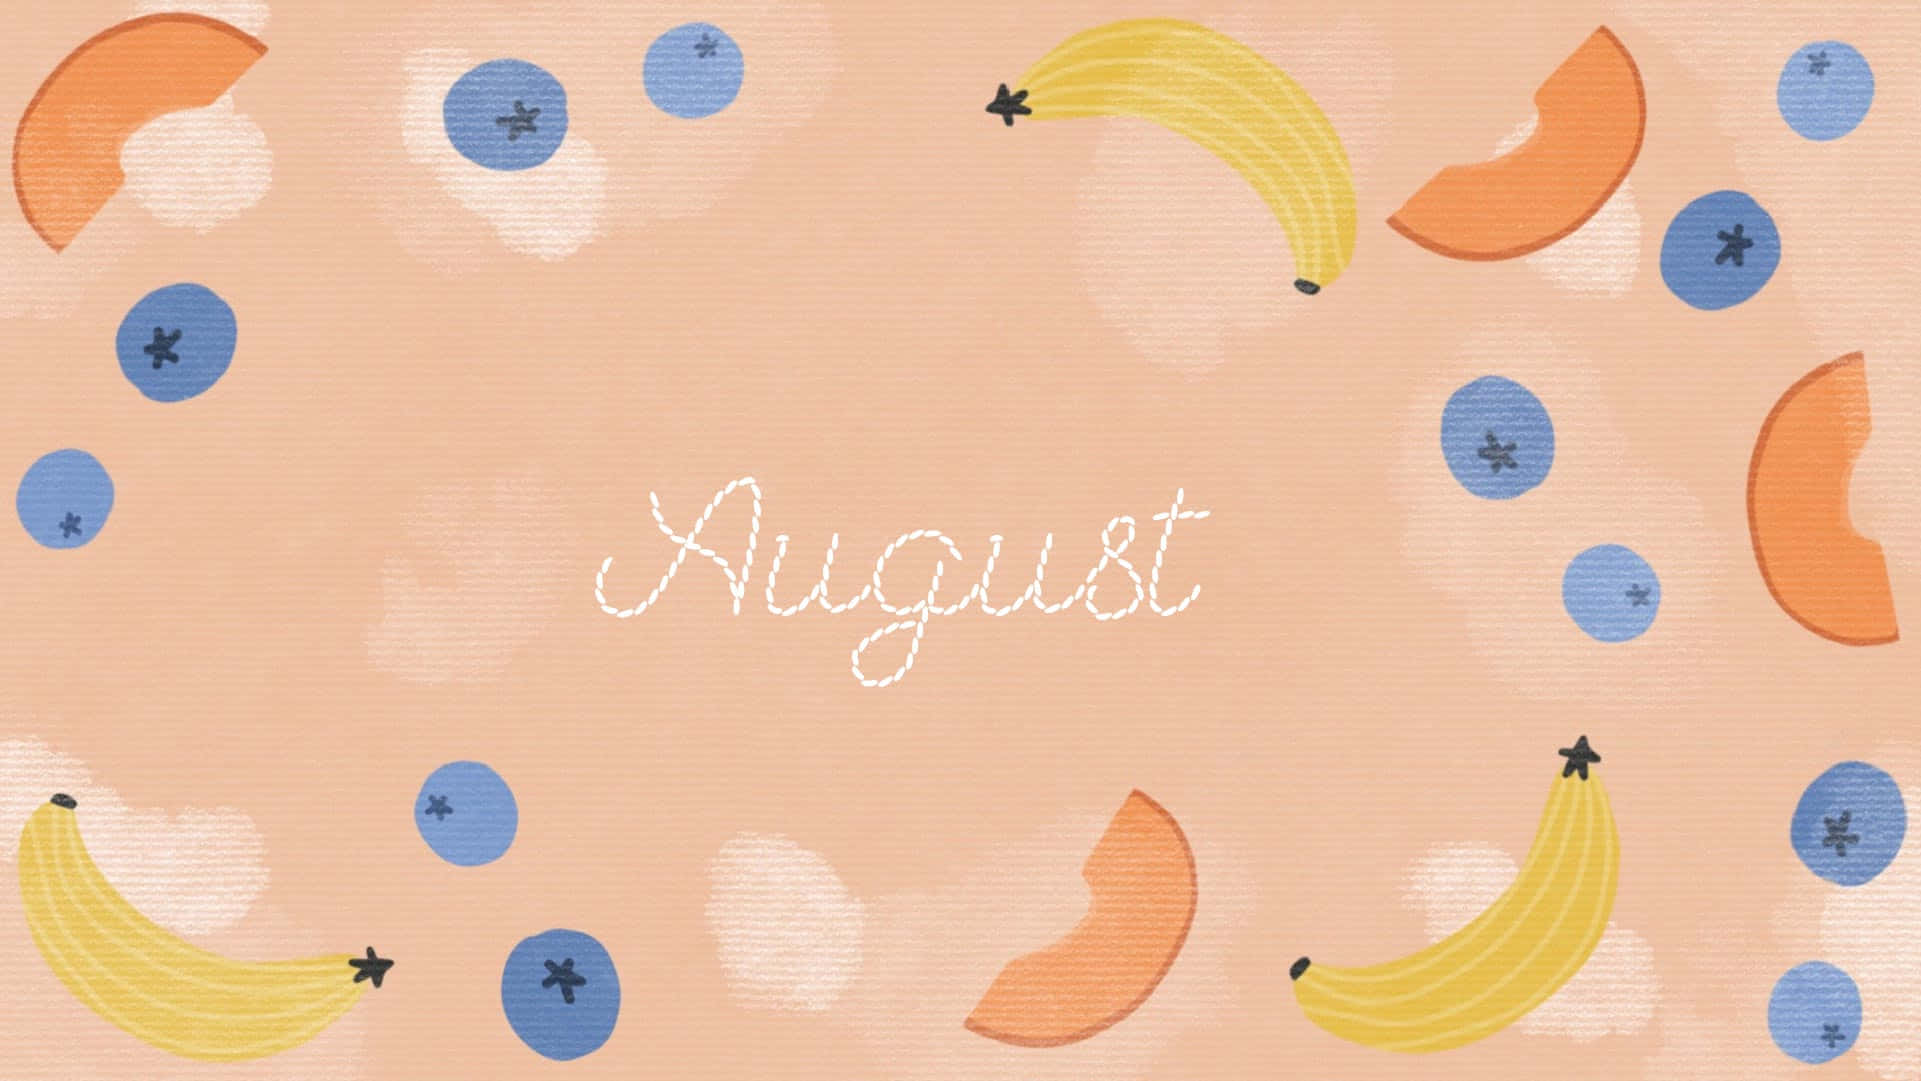 Enjoy the summer possibilities in August